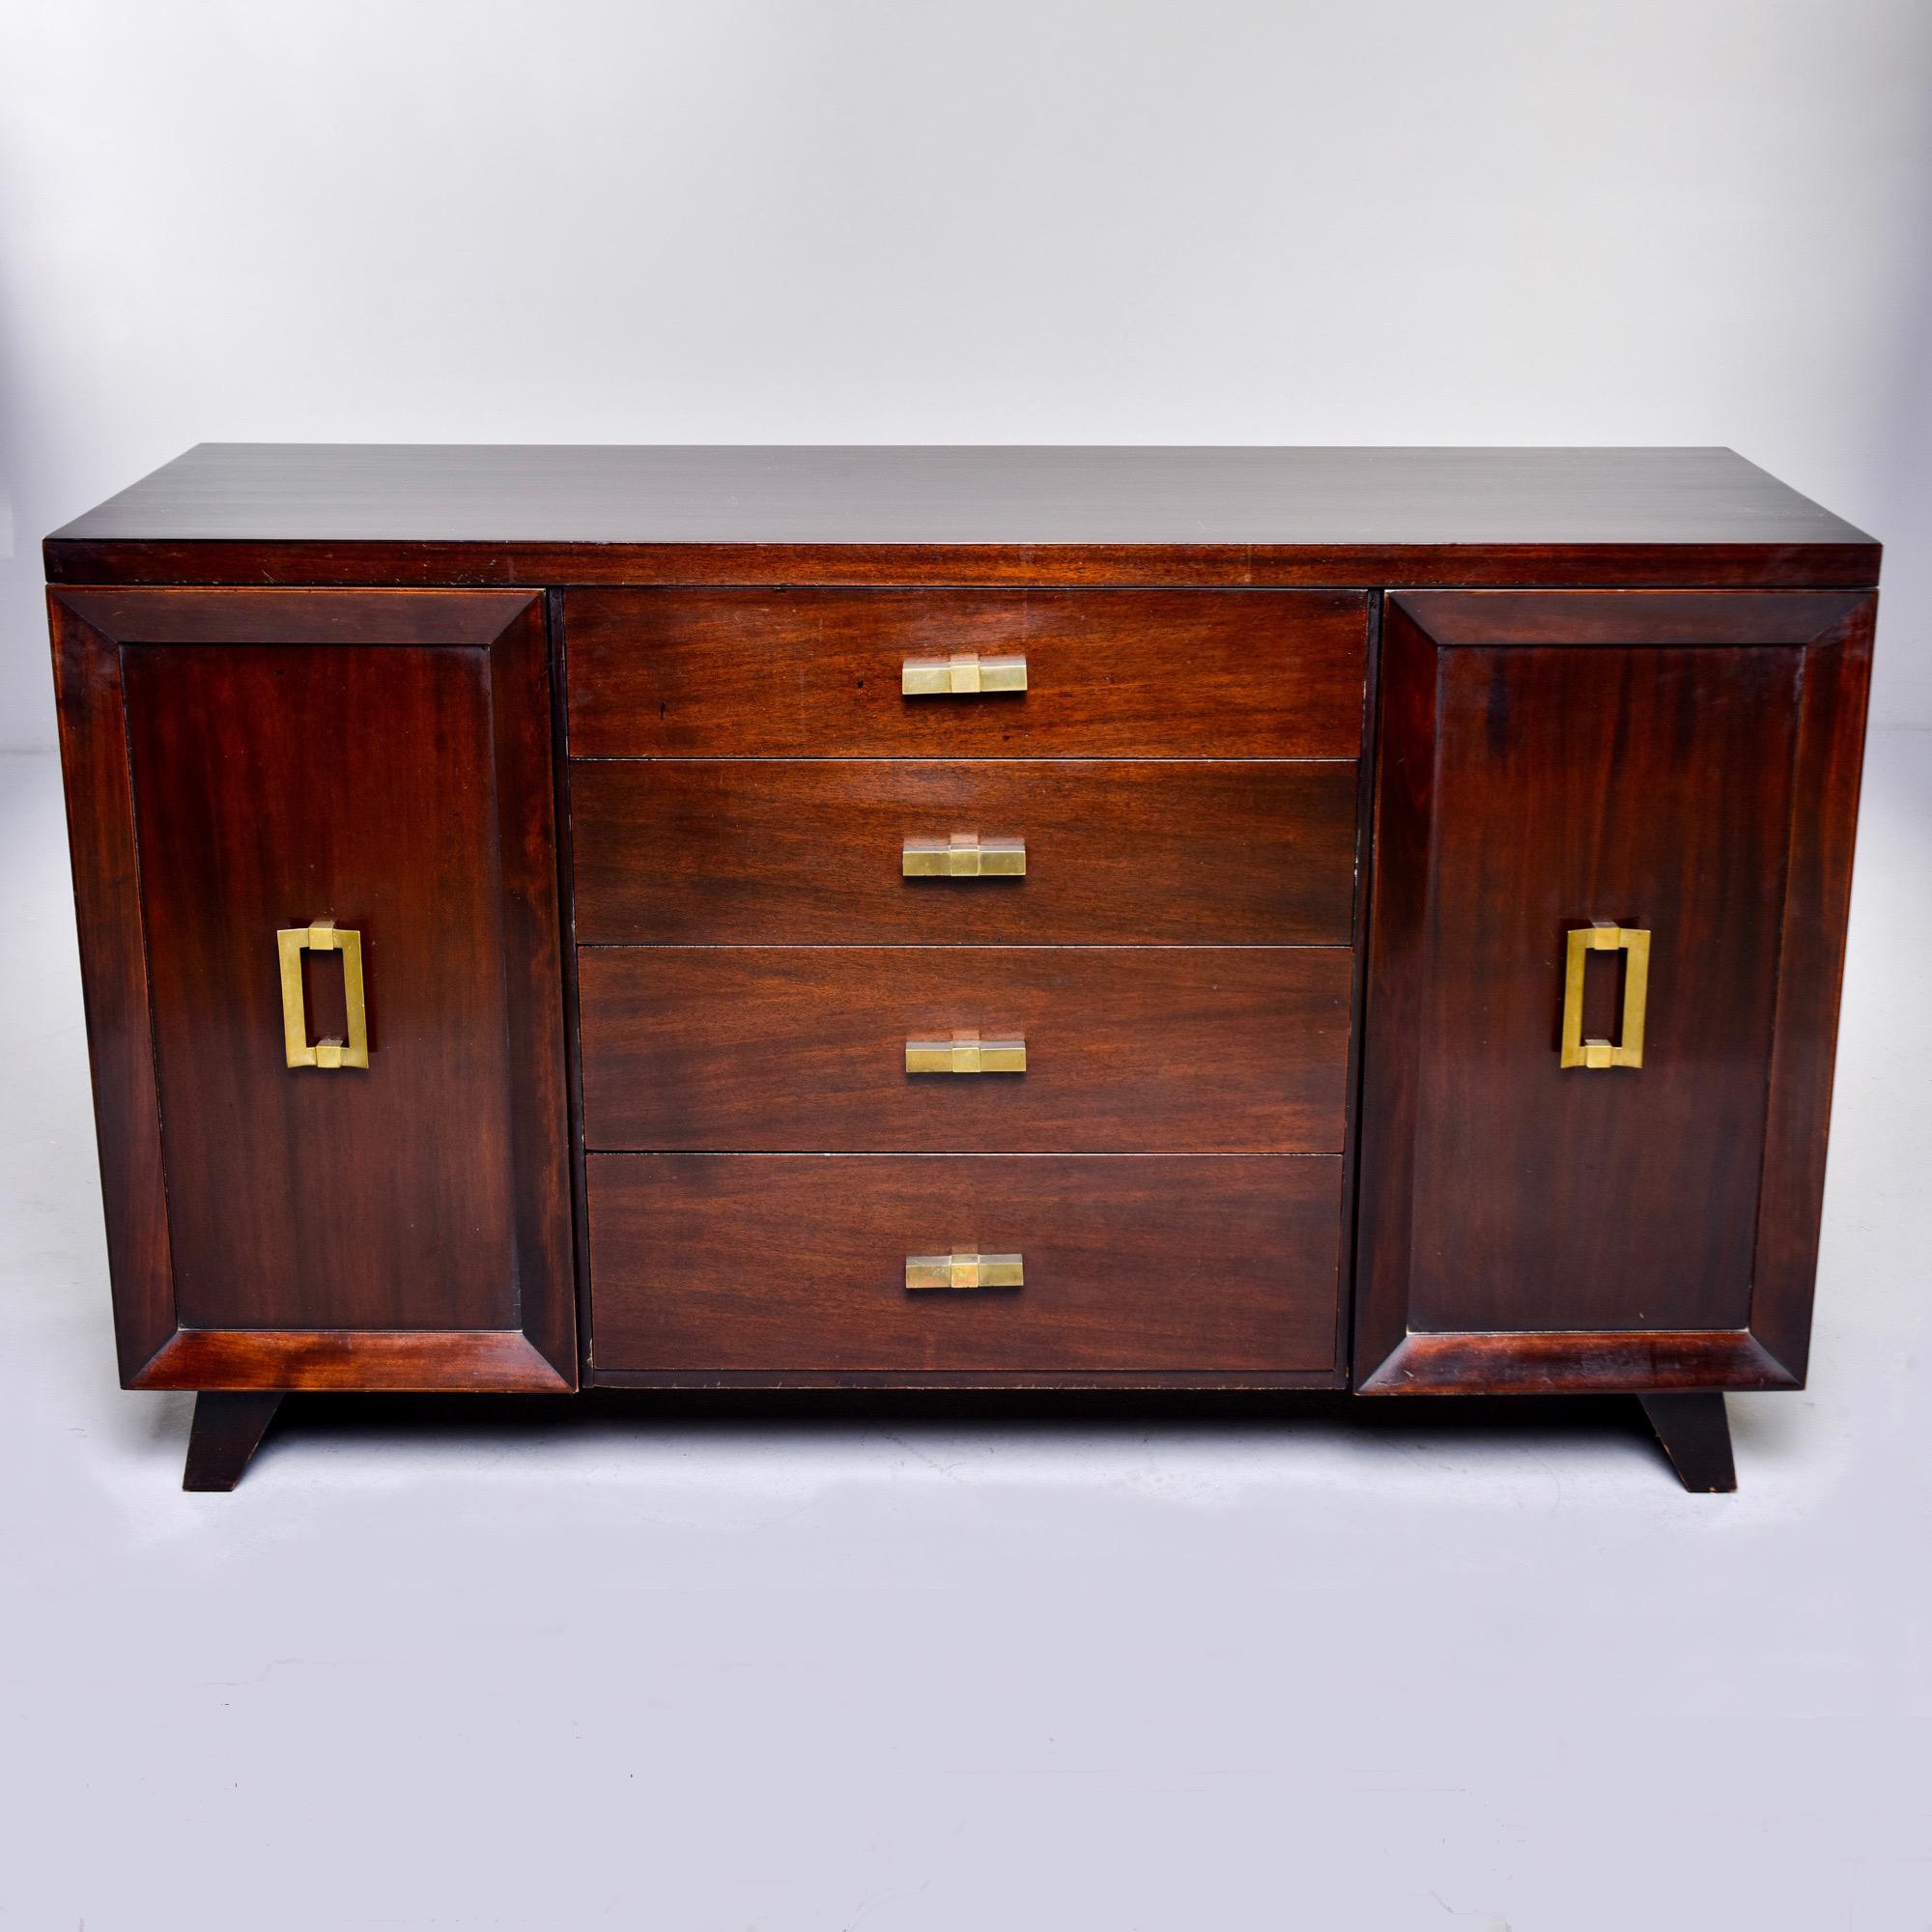 French buffet in dark walnut with four center drawers flanked by two side cabinets, circa 1950s. Each cabinet features a top fabric lined divided drawer over a storage compartment with single interior shelf. Original brass hardware, angled legs and